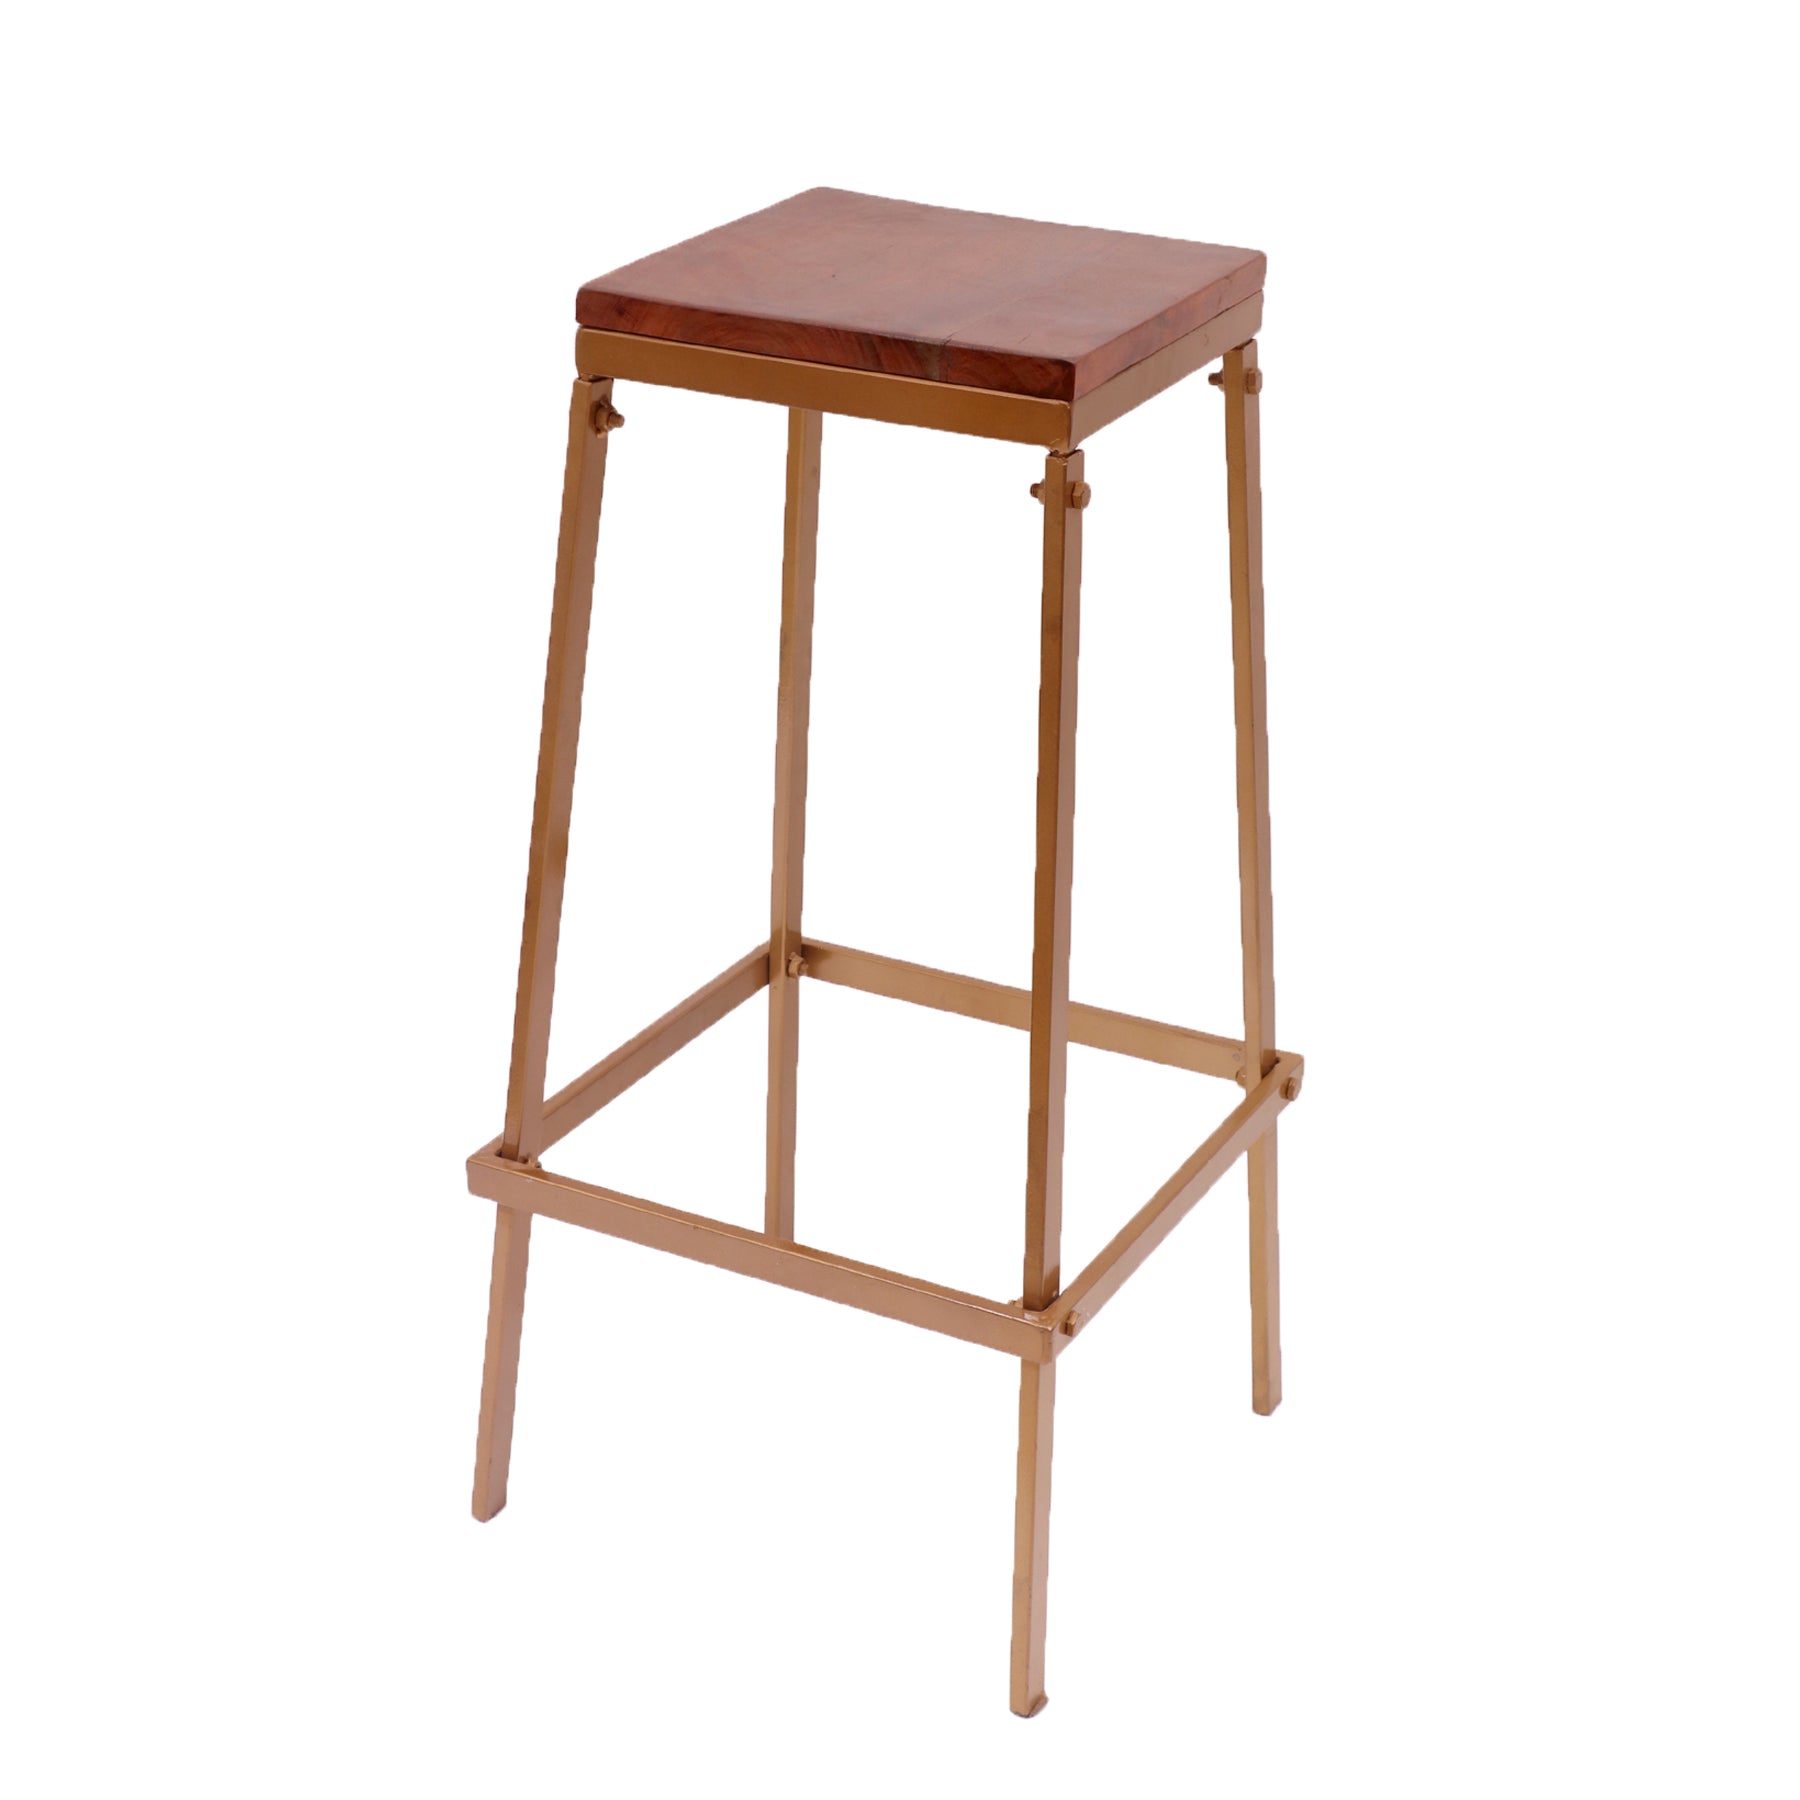 Dull Gold Solid Wood Stool Stool